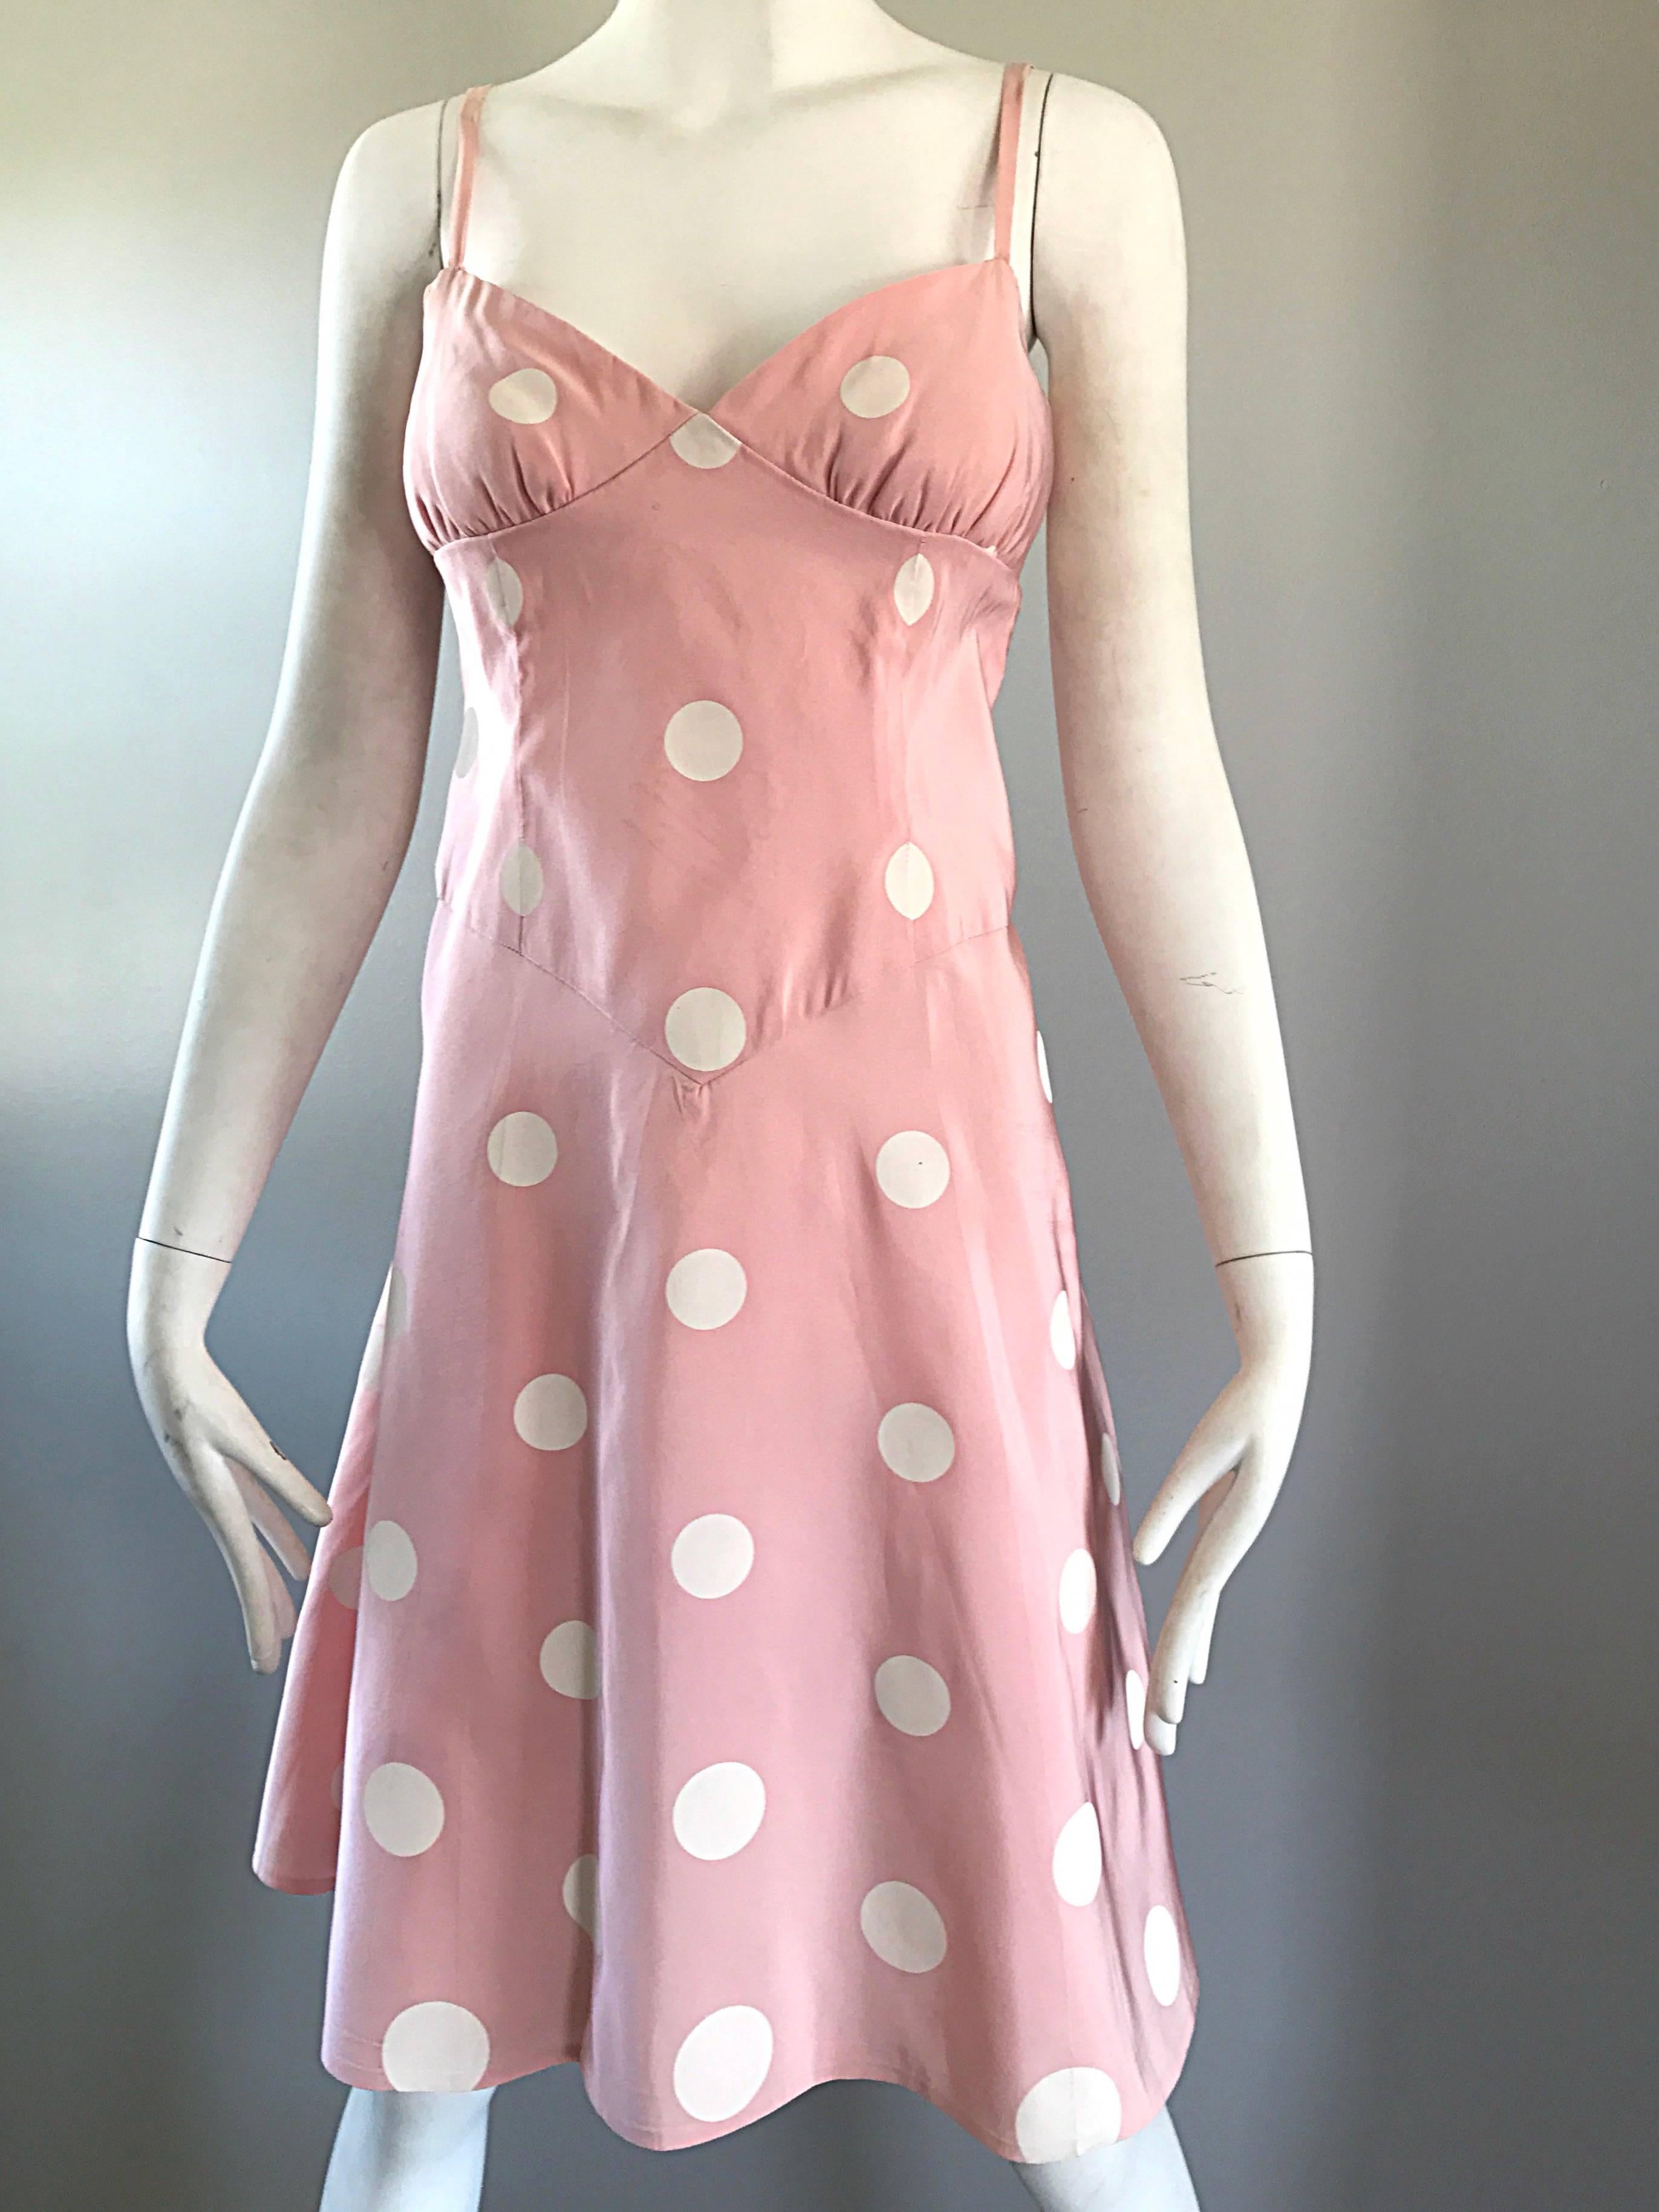 Bill Blass Pink White Polka Dot Hand Painted Fit and Flare Vintage Dress, 1990 For Sale 1